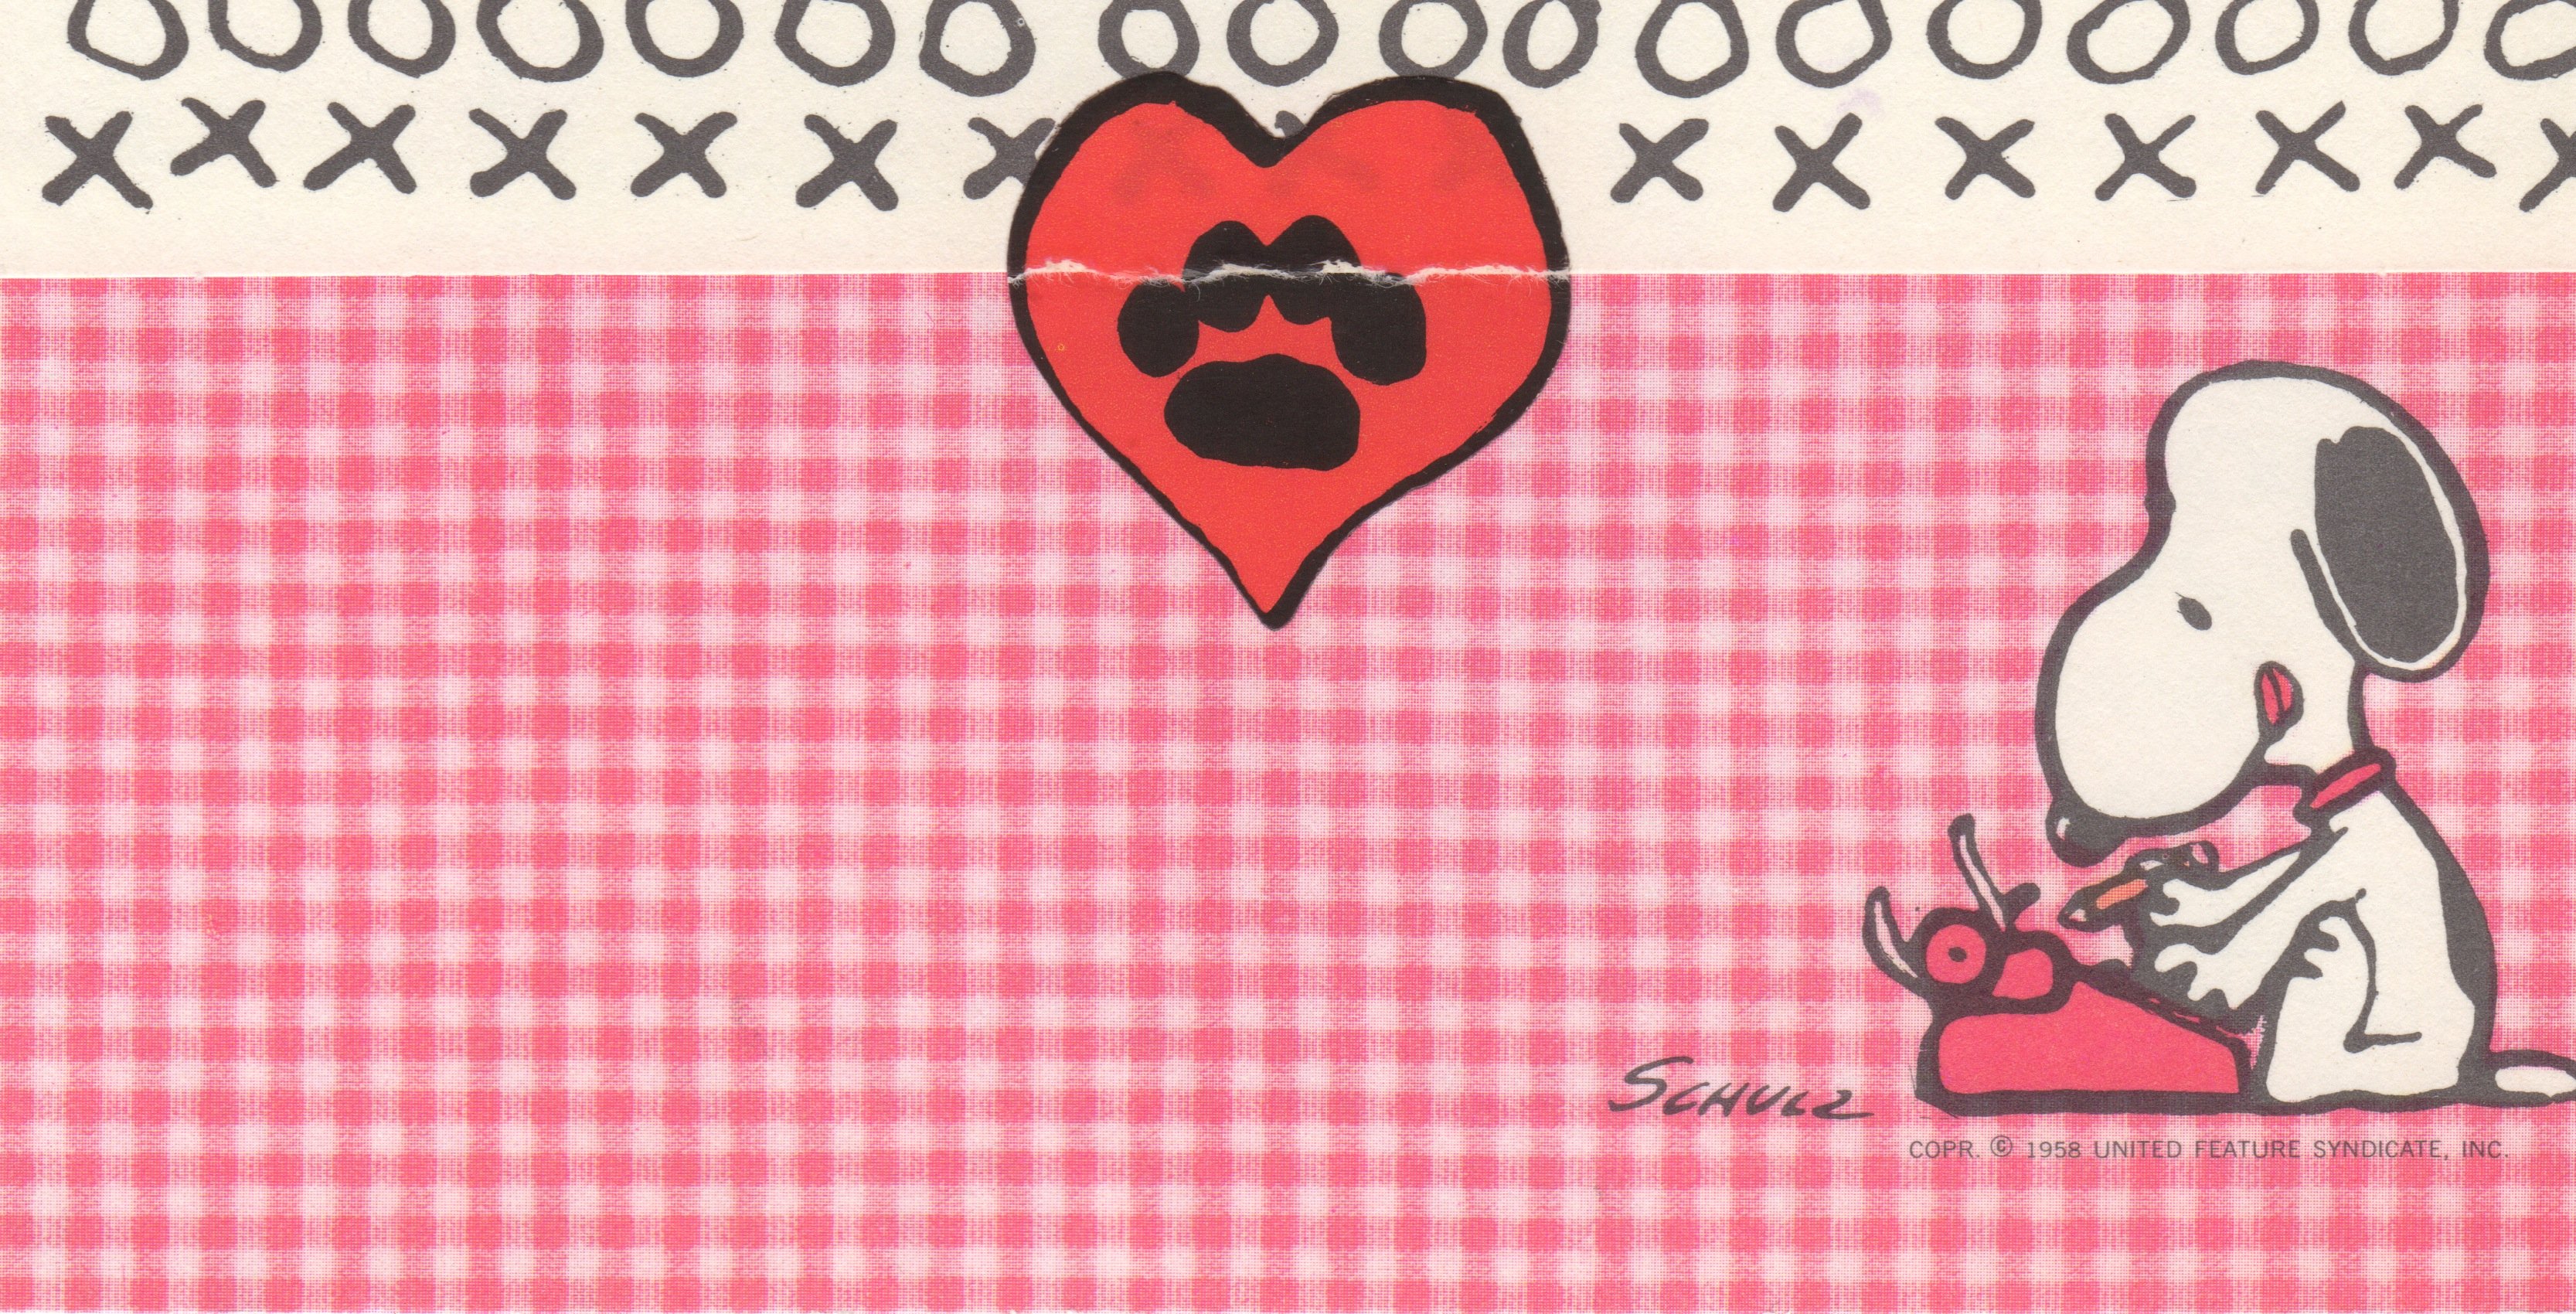 Mood Love Holiday Valentine Heart Snoopy Peanuts Wallpaper Background